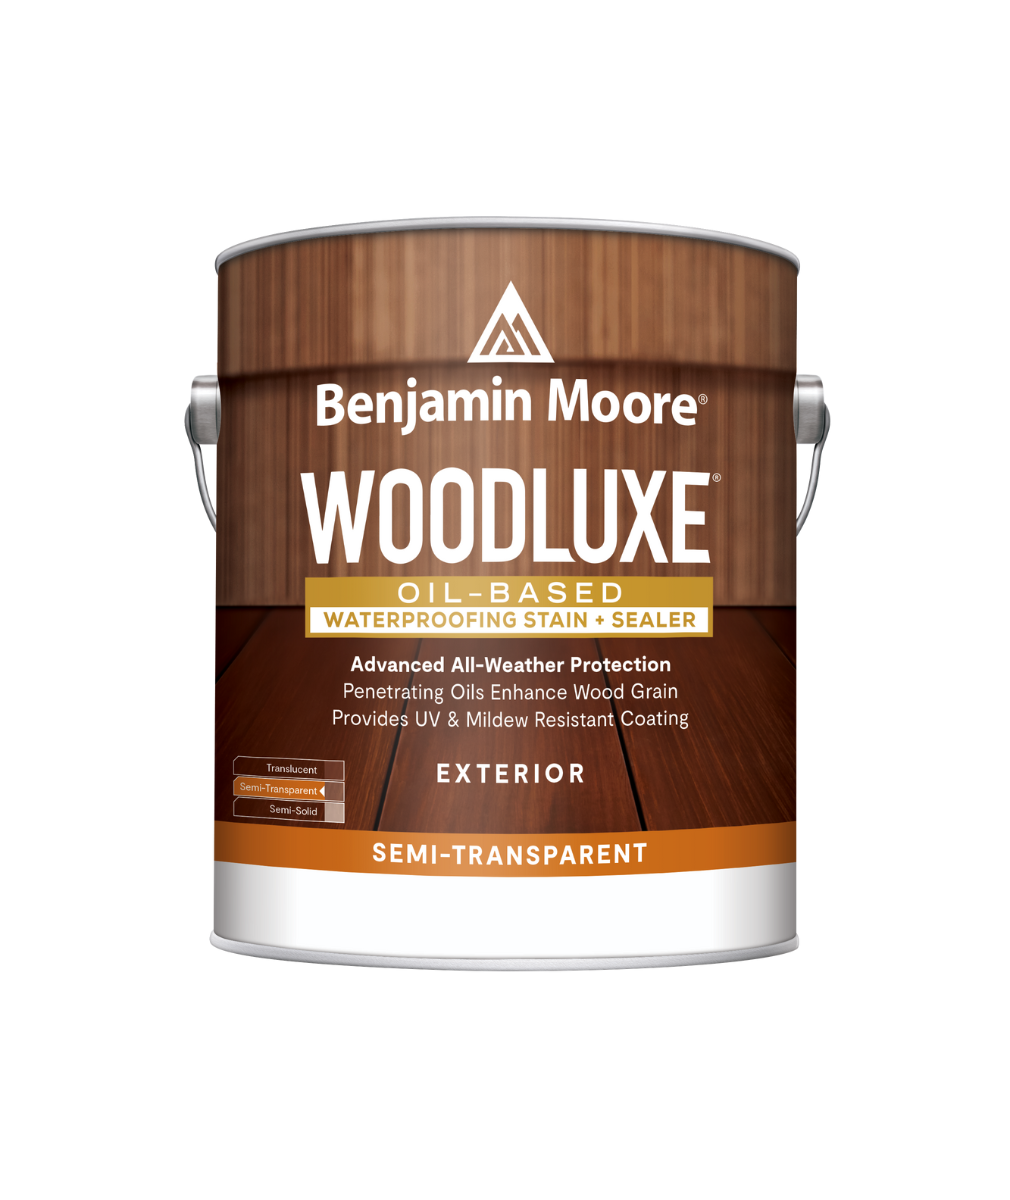 Benjamin Moore Woodluxe® Oil-Based Semi-Transparent Exterior Stain available at Southwestern Paint.